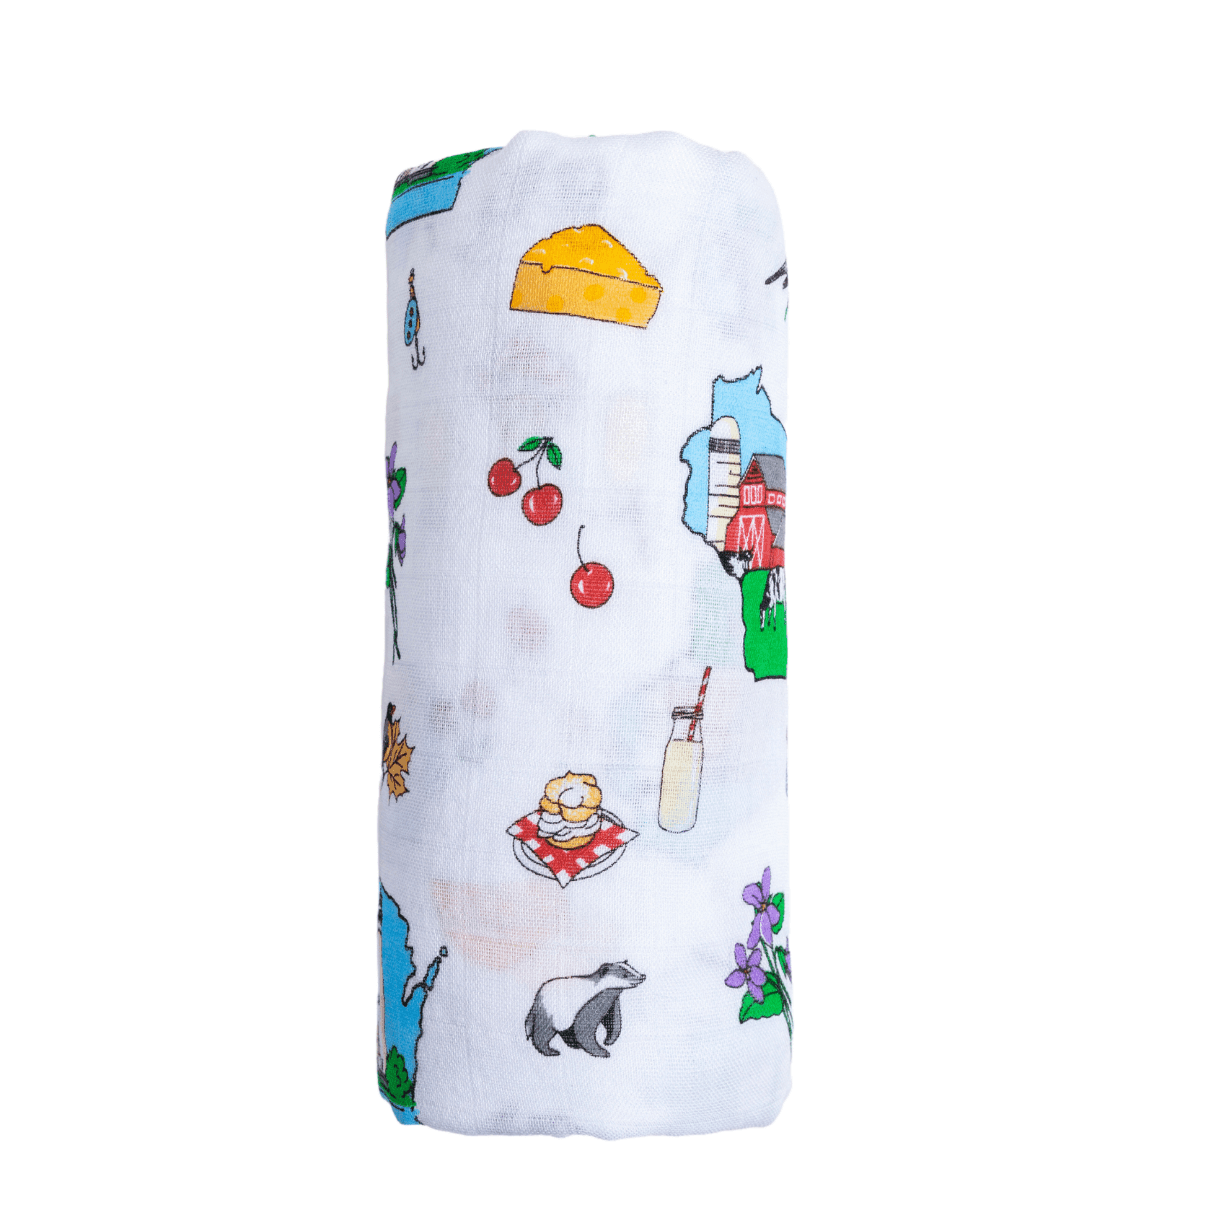 Wisconsin-themed baby muslin swaddle blanket with state icons like cheese, cows, and barns on a white background.